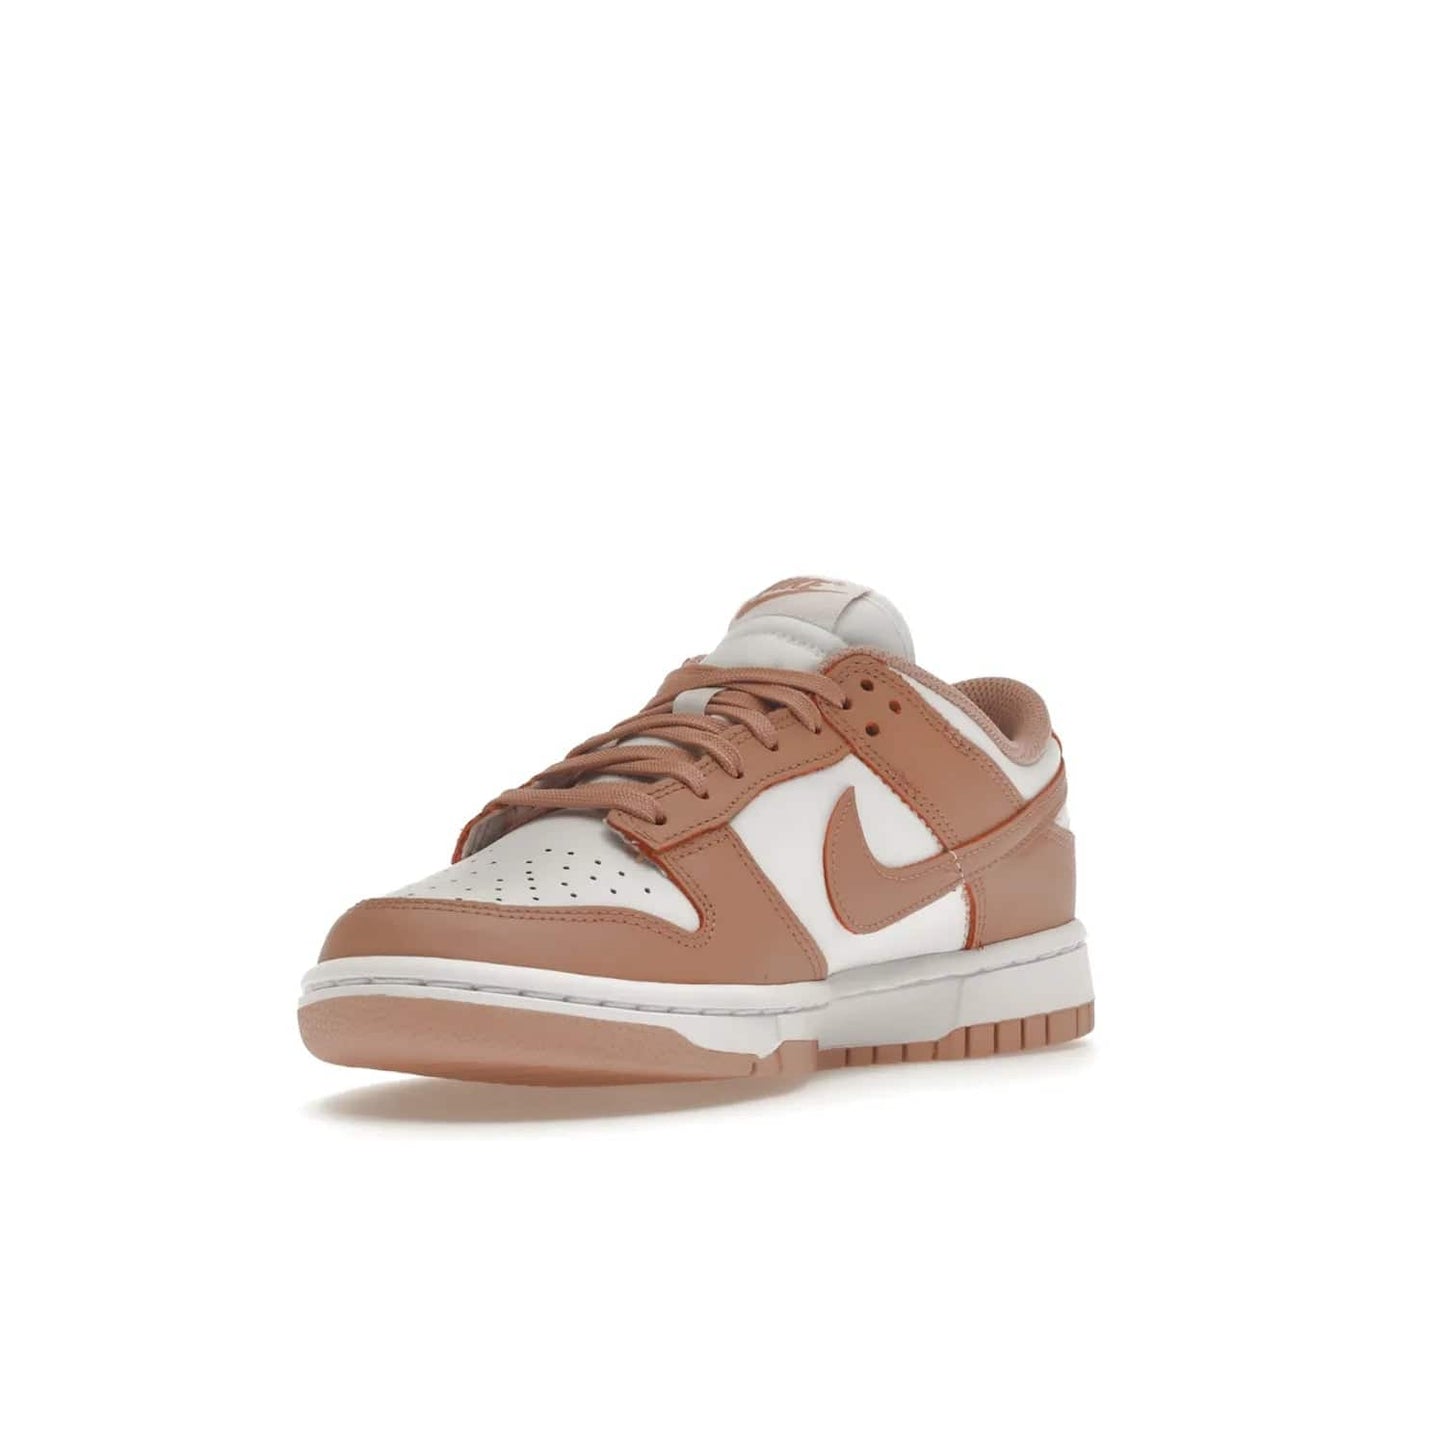 Nike Dunk Low Rose Whisper (Women's) - Image 14 - Only at www.BallersClubKickz.com - The Nike Dunk Low Rose Whisper is the perfect summer shoe with classic two-tone look and vintage-inspired design. Features white and Rose Whisper leather upper, woven tongue labels and EVA foam sole for plush cushioning. Available June 2022 at $100.